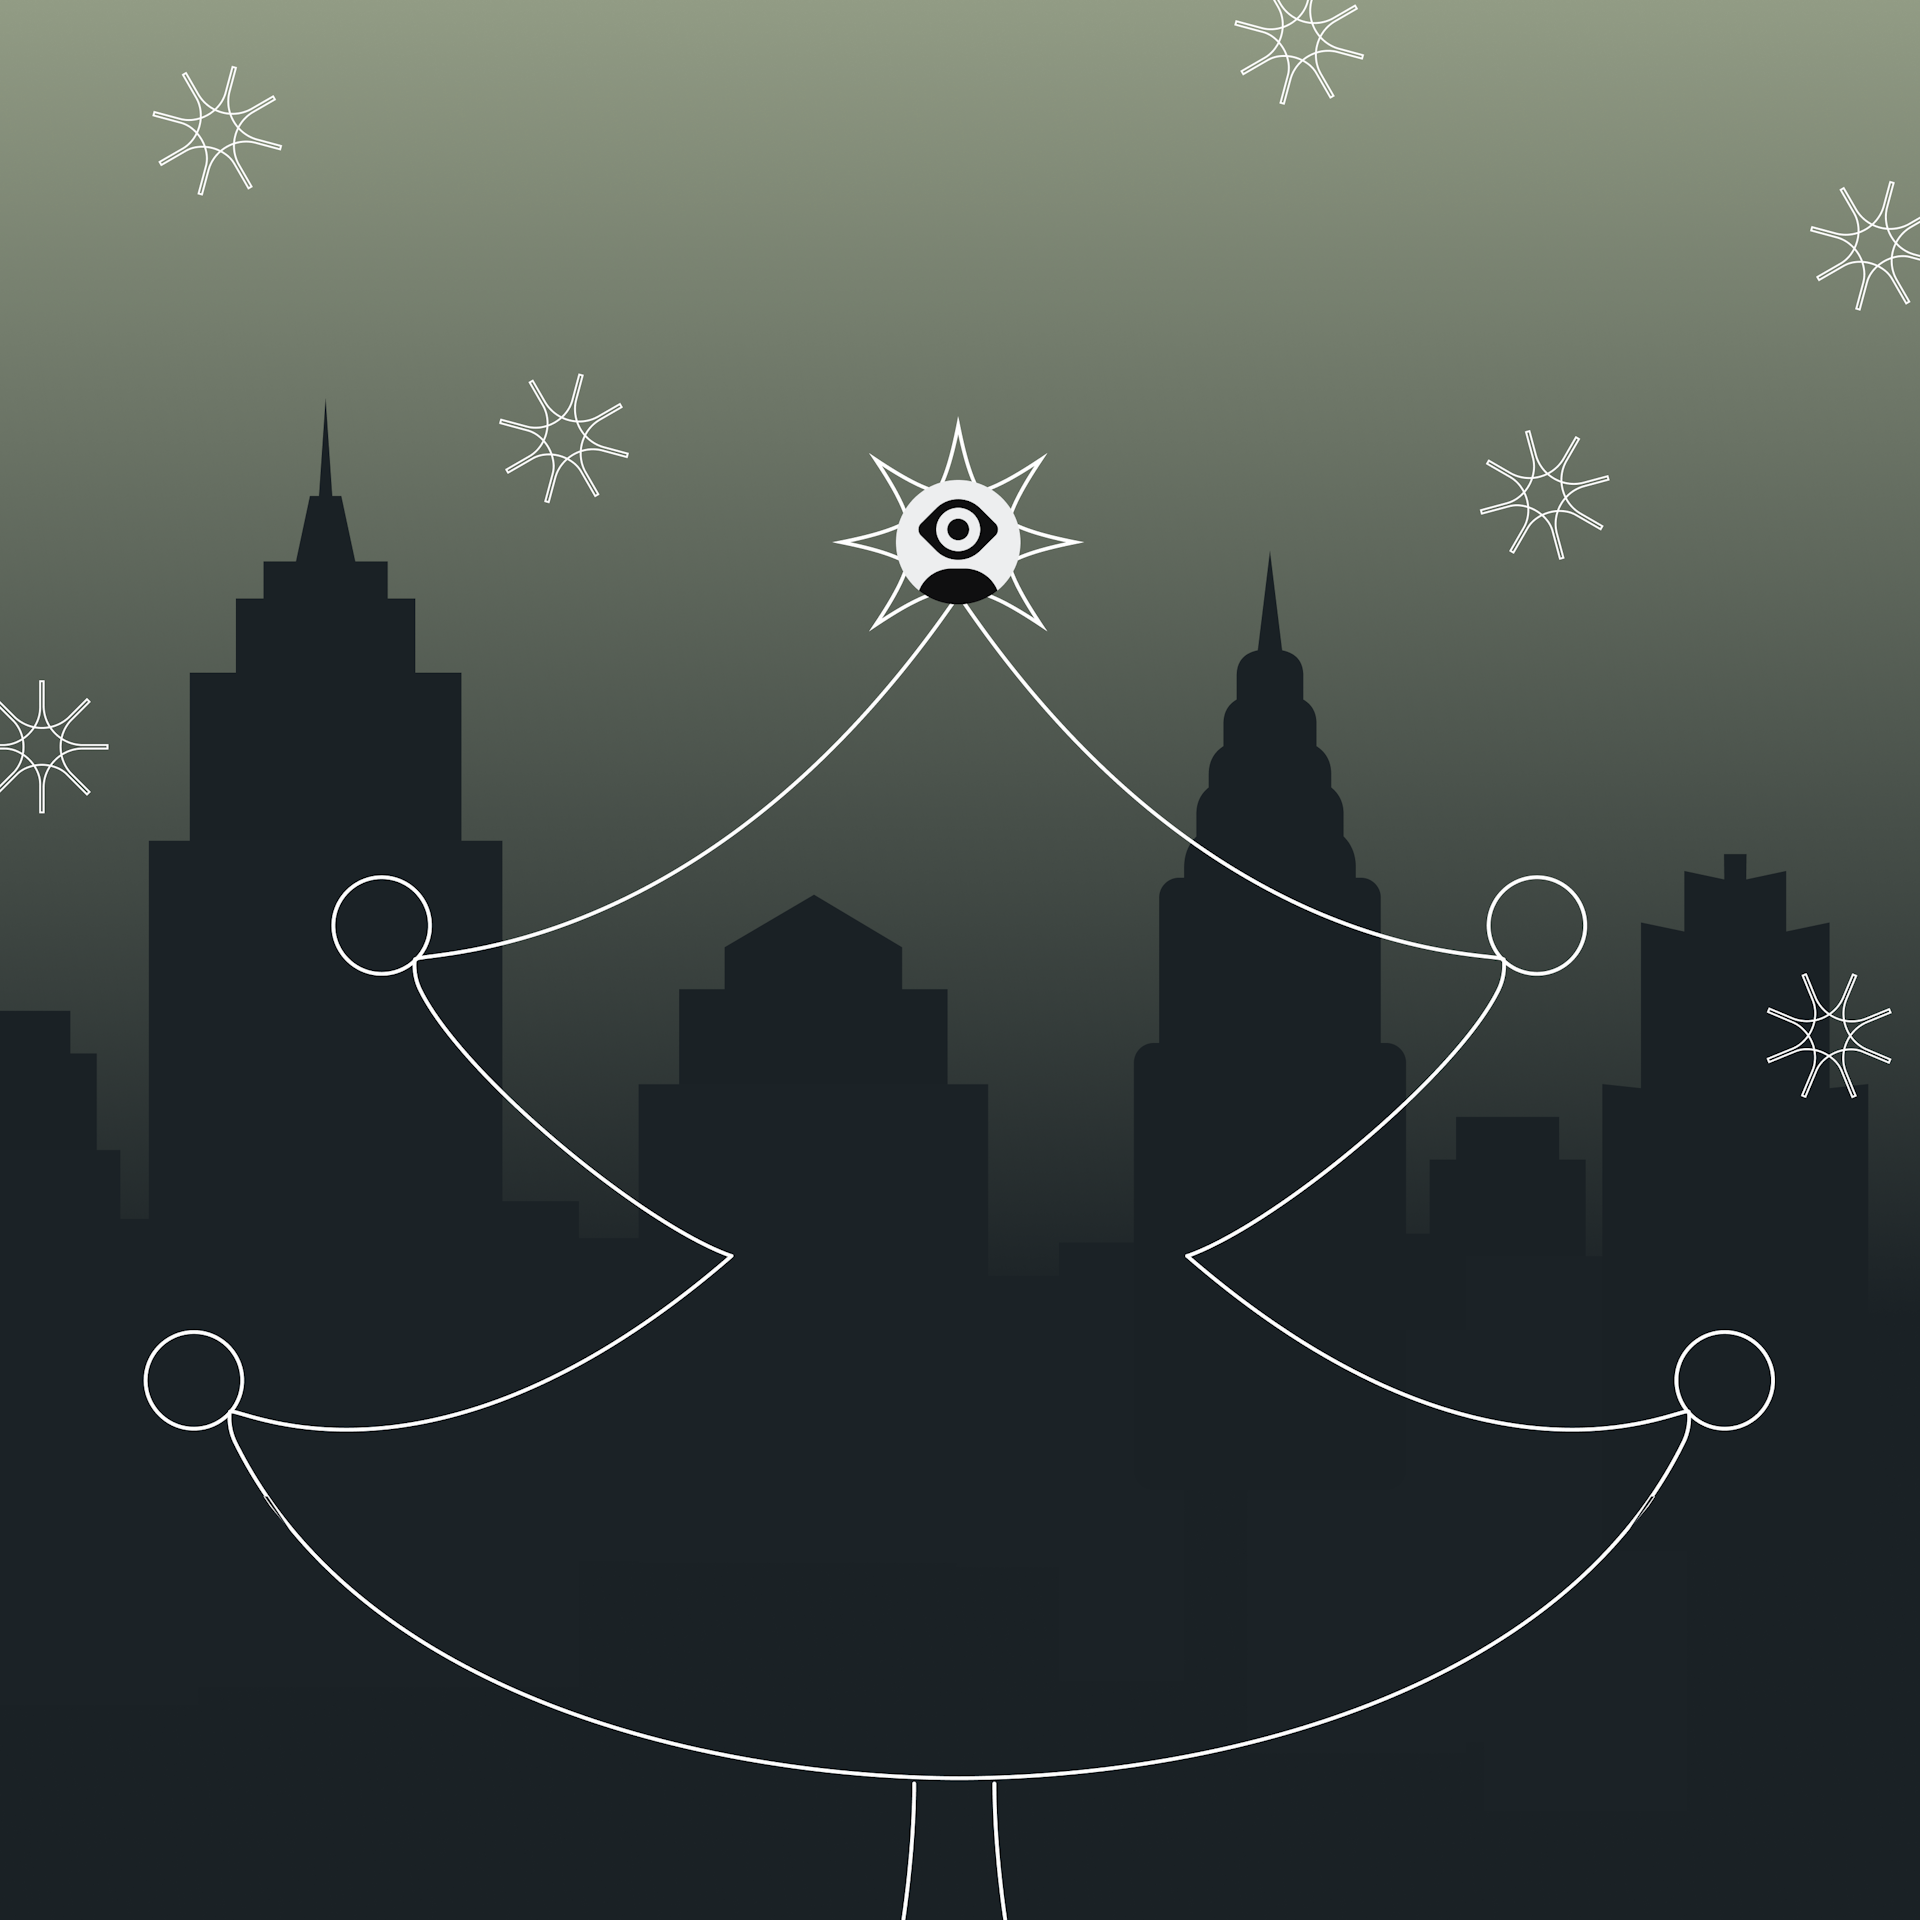 Illustration of a Christmas tree with a Big Human logo star topper